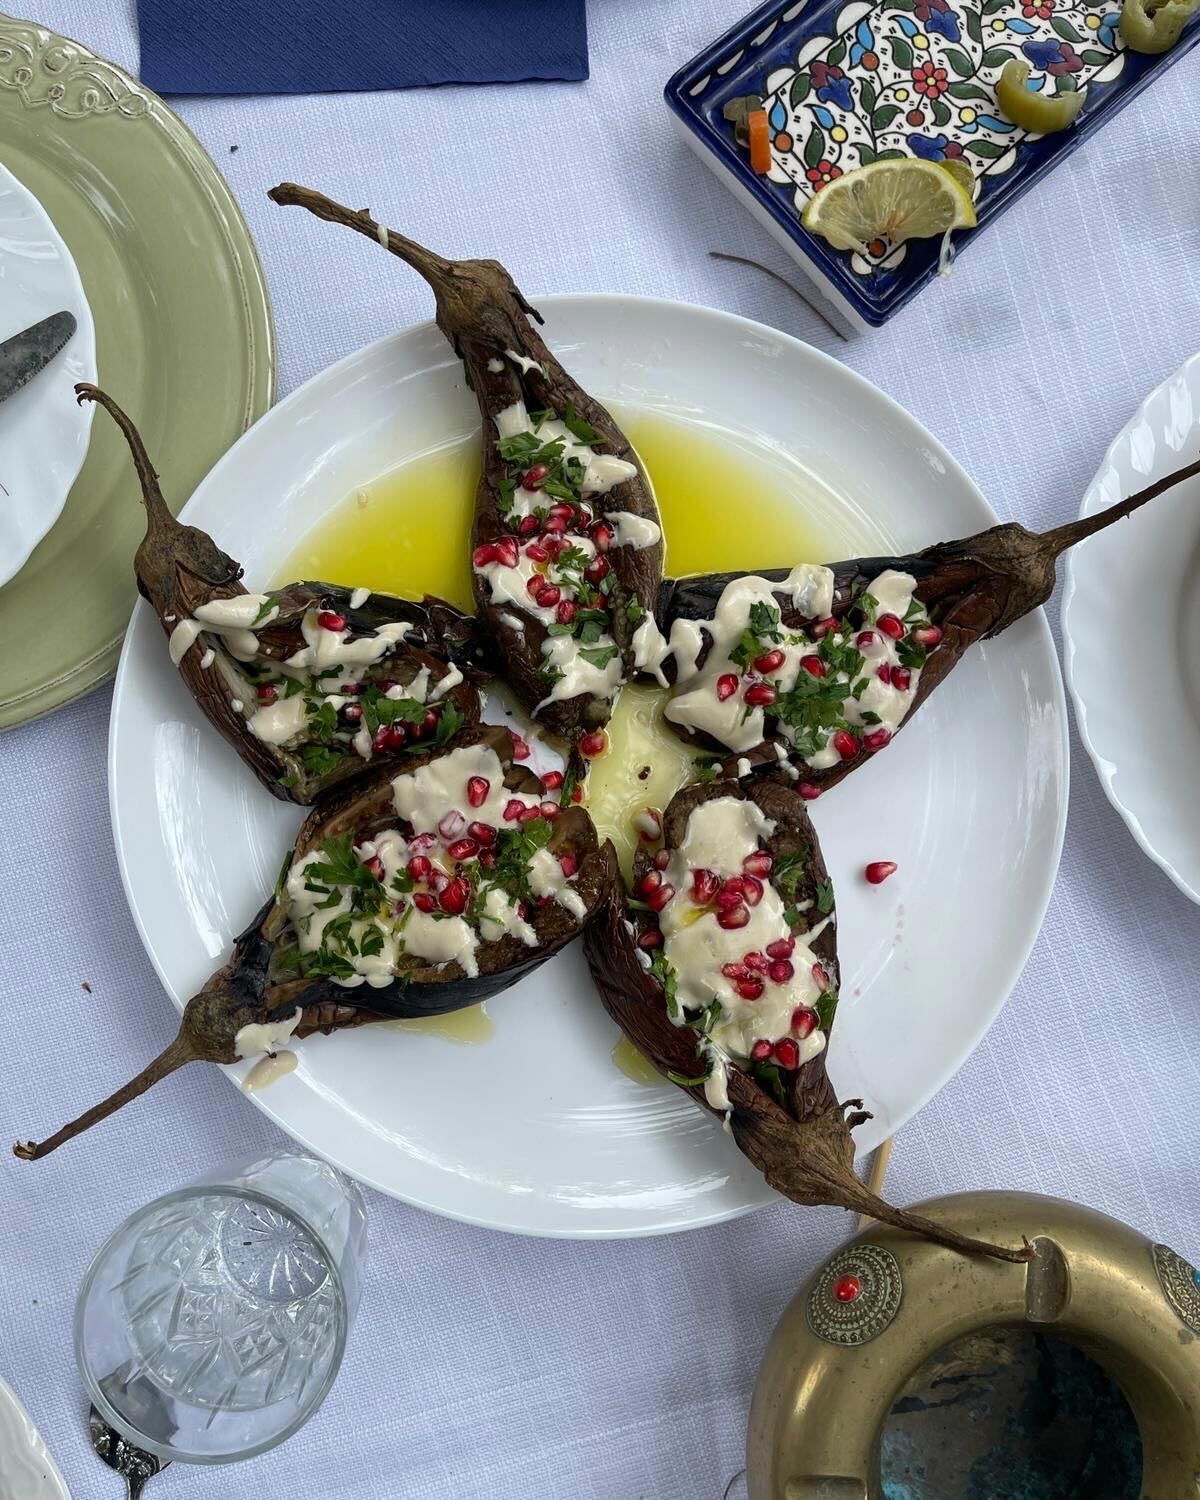 A photo of a plate with a Palestinian dish featuring eggplant and pomegranate